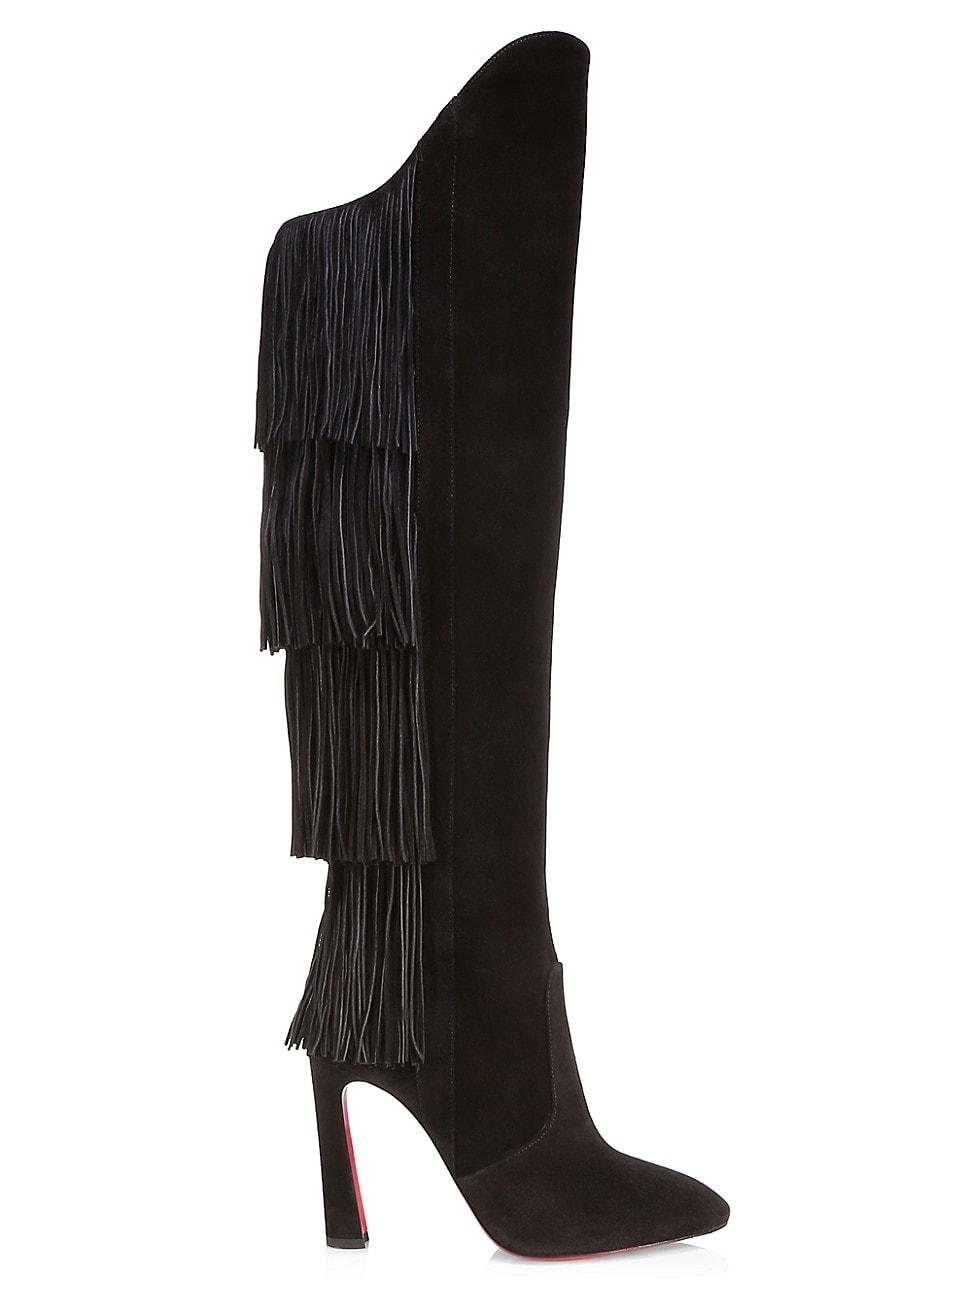 Christian Louboutin Lionne Tall Fringe Suede Boots in Black - Lyst